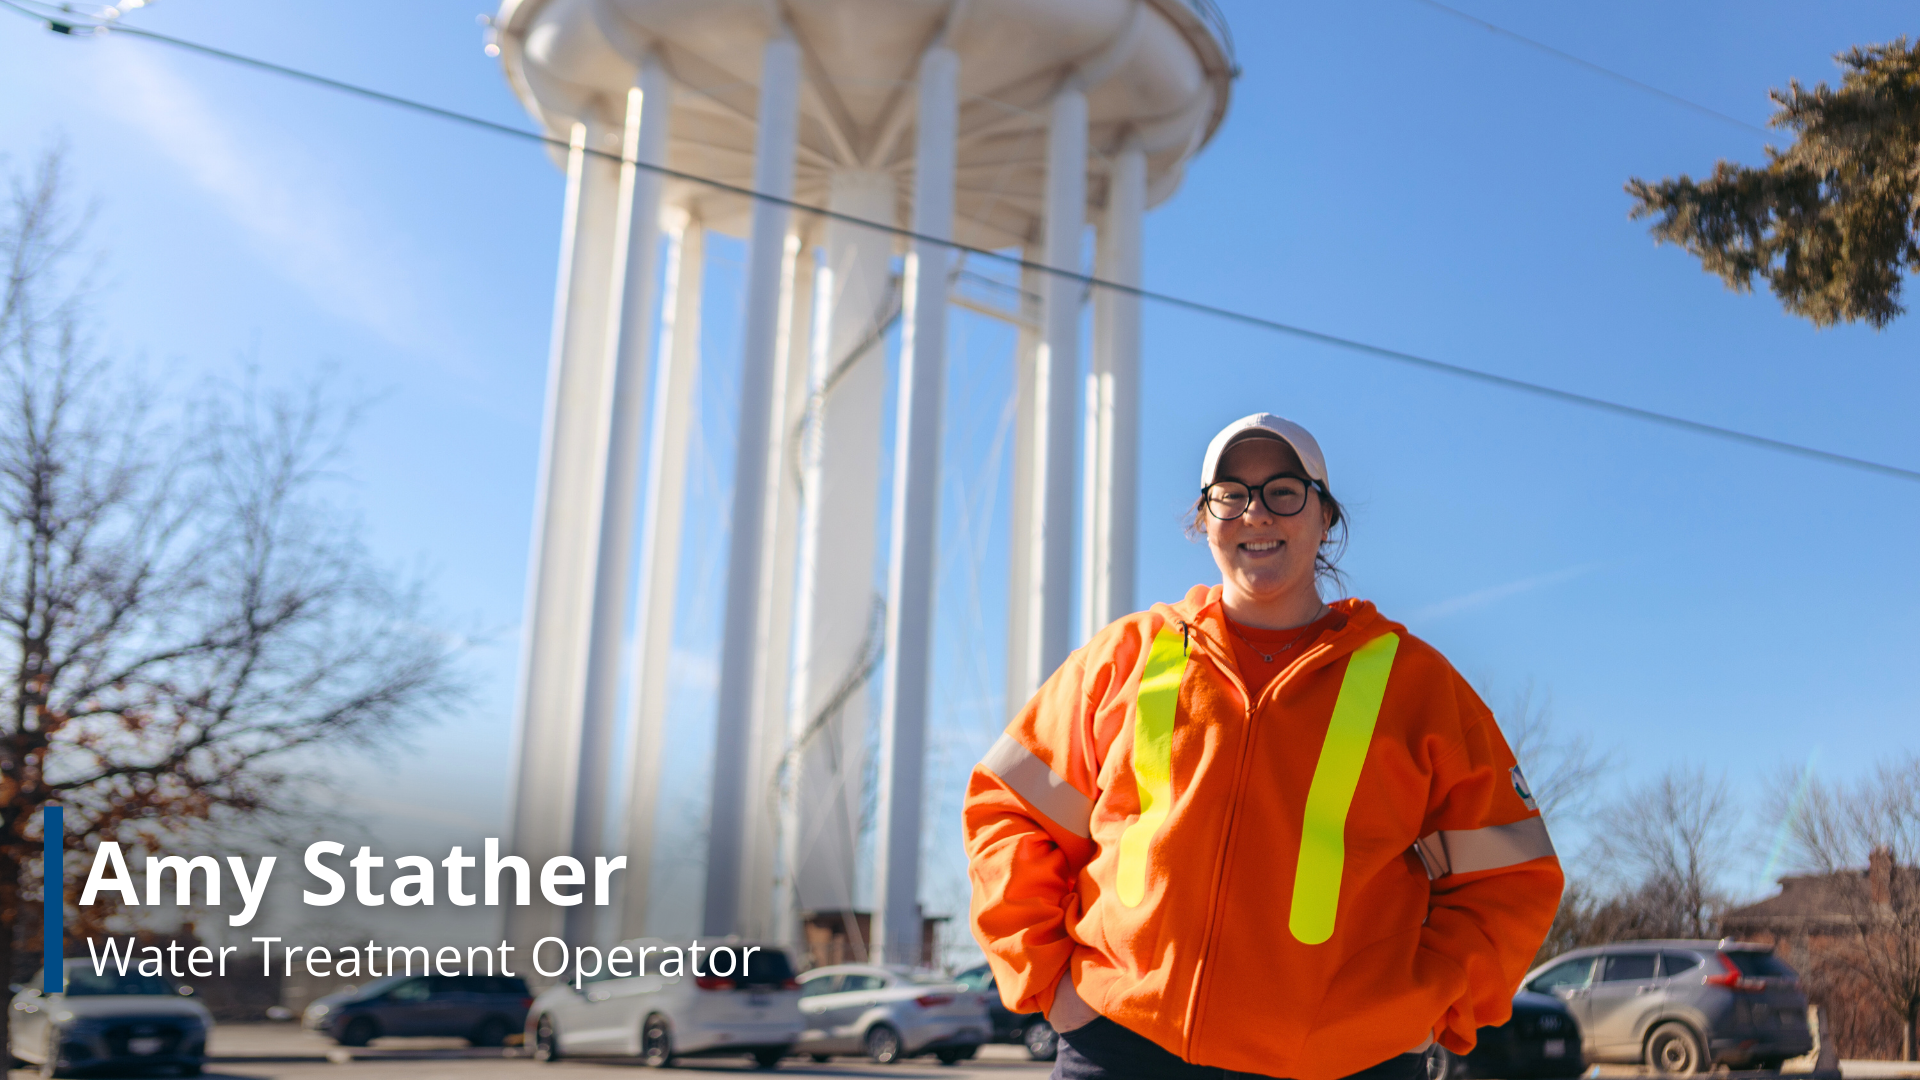 A photo of Amy Slather, a Water Treatment Operator, with the Belleville Water Tower in the background.